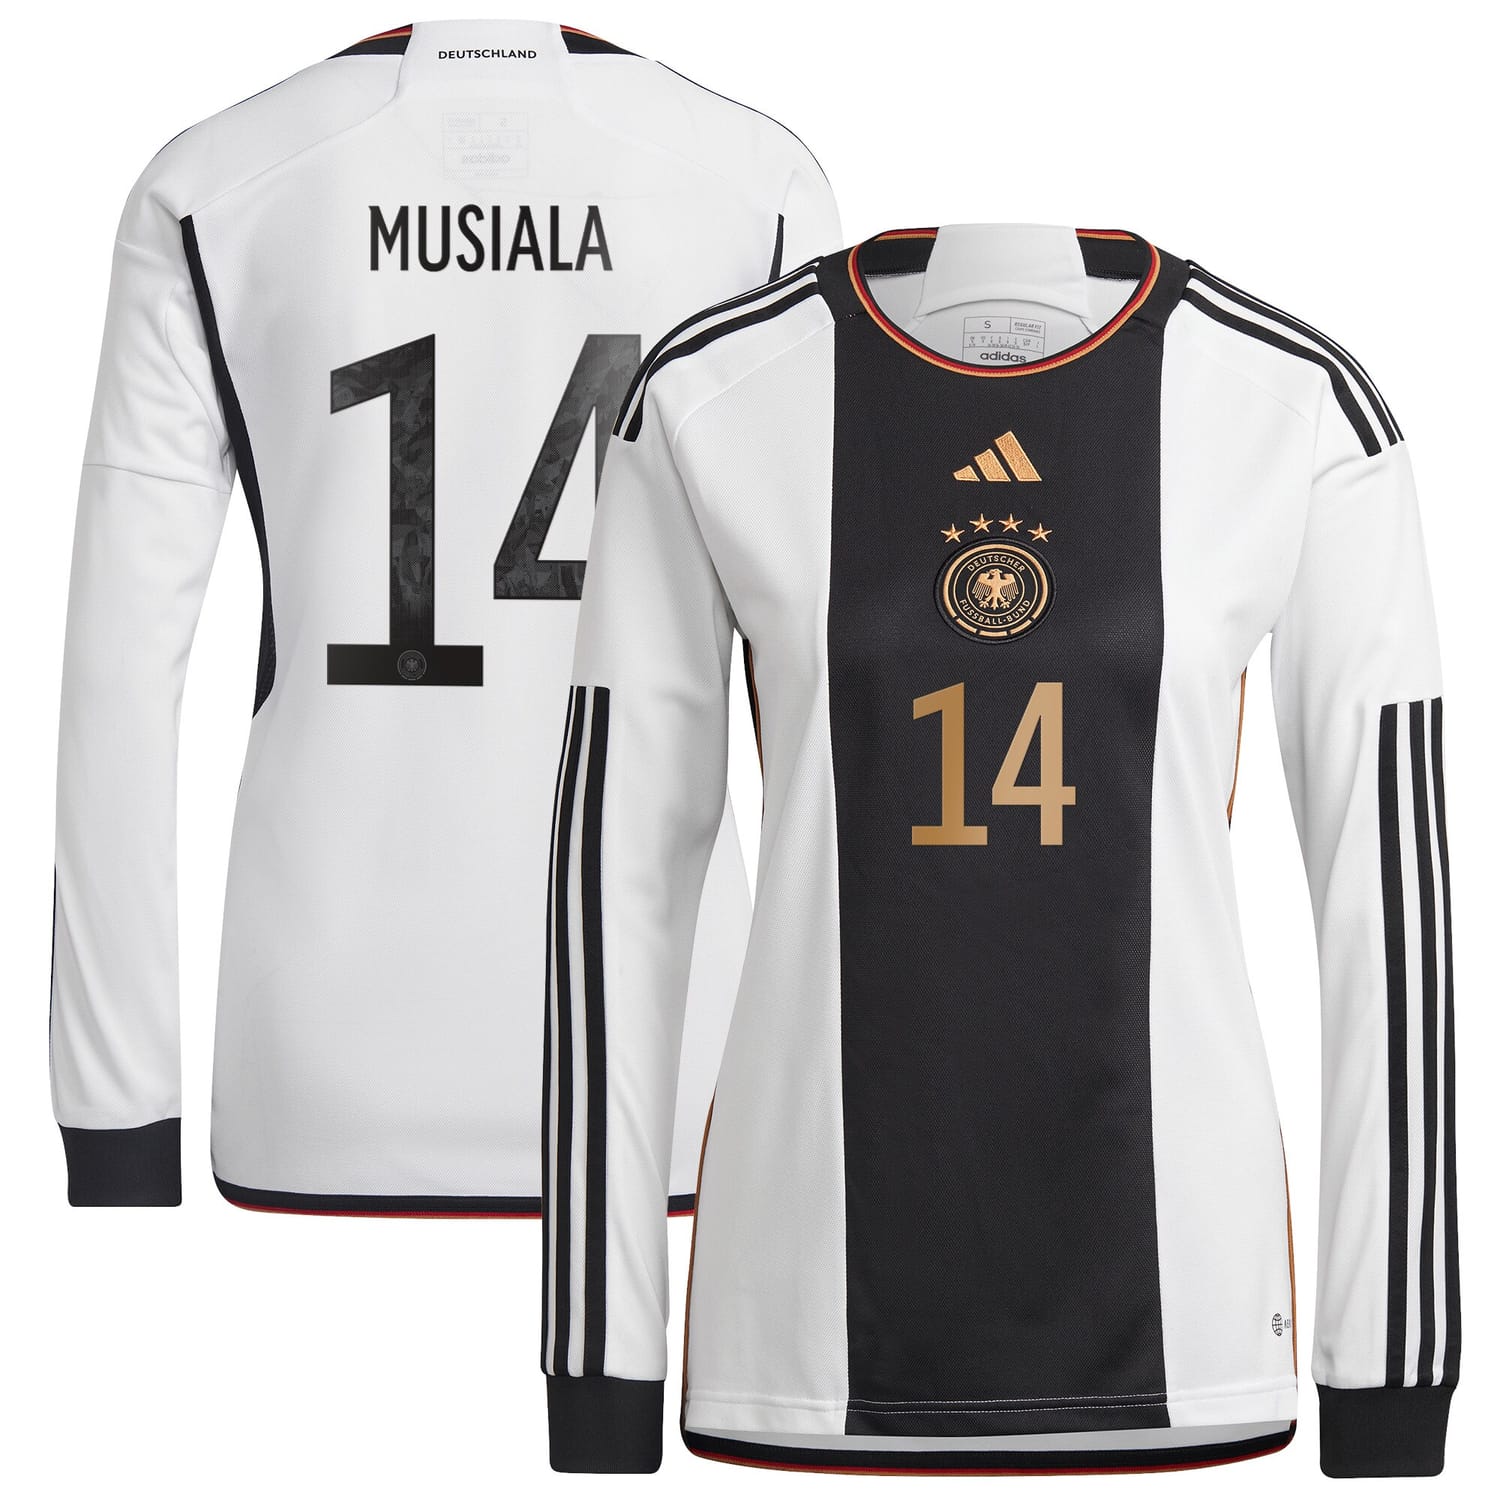 Germany National Team Home Jersey Shirt Long Sleeve player Jamal Musiala 14 printing for Women